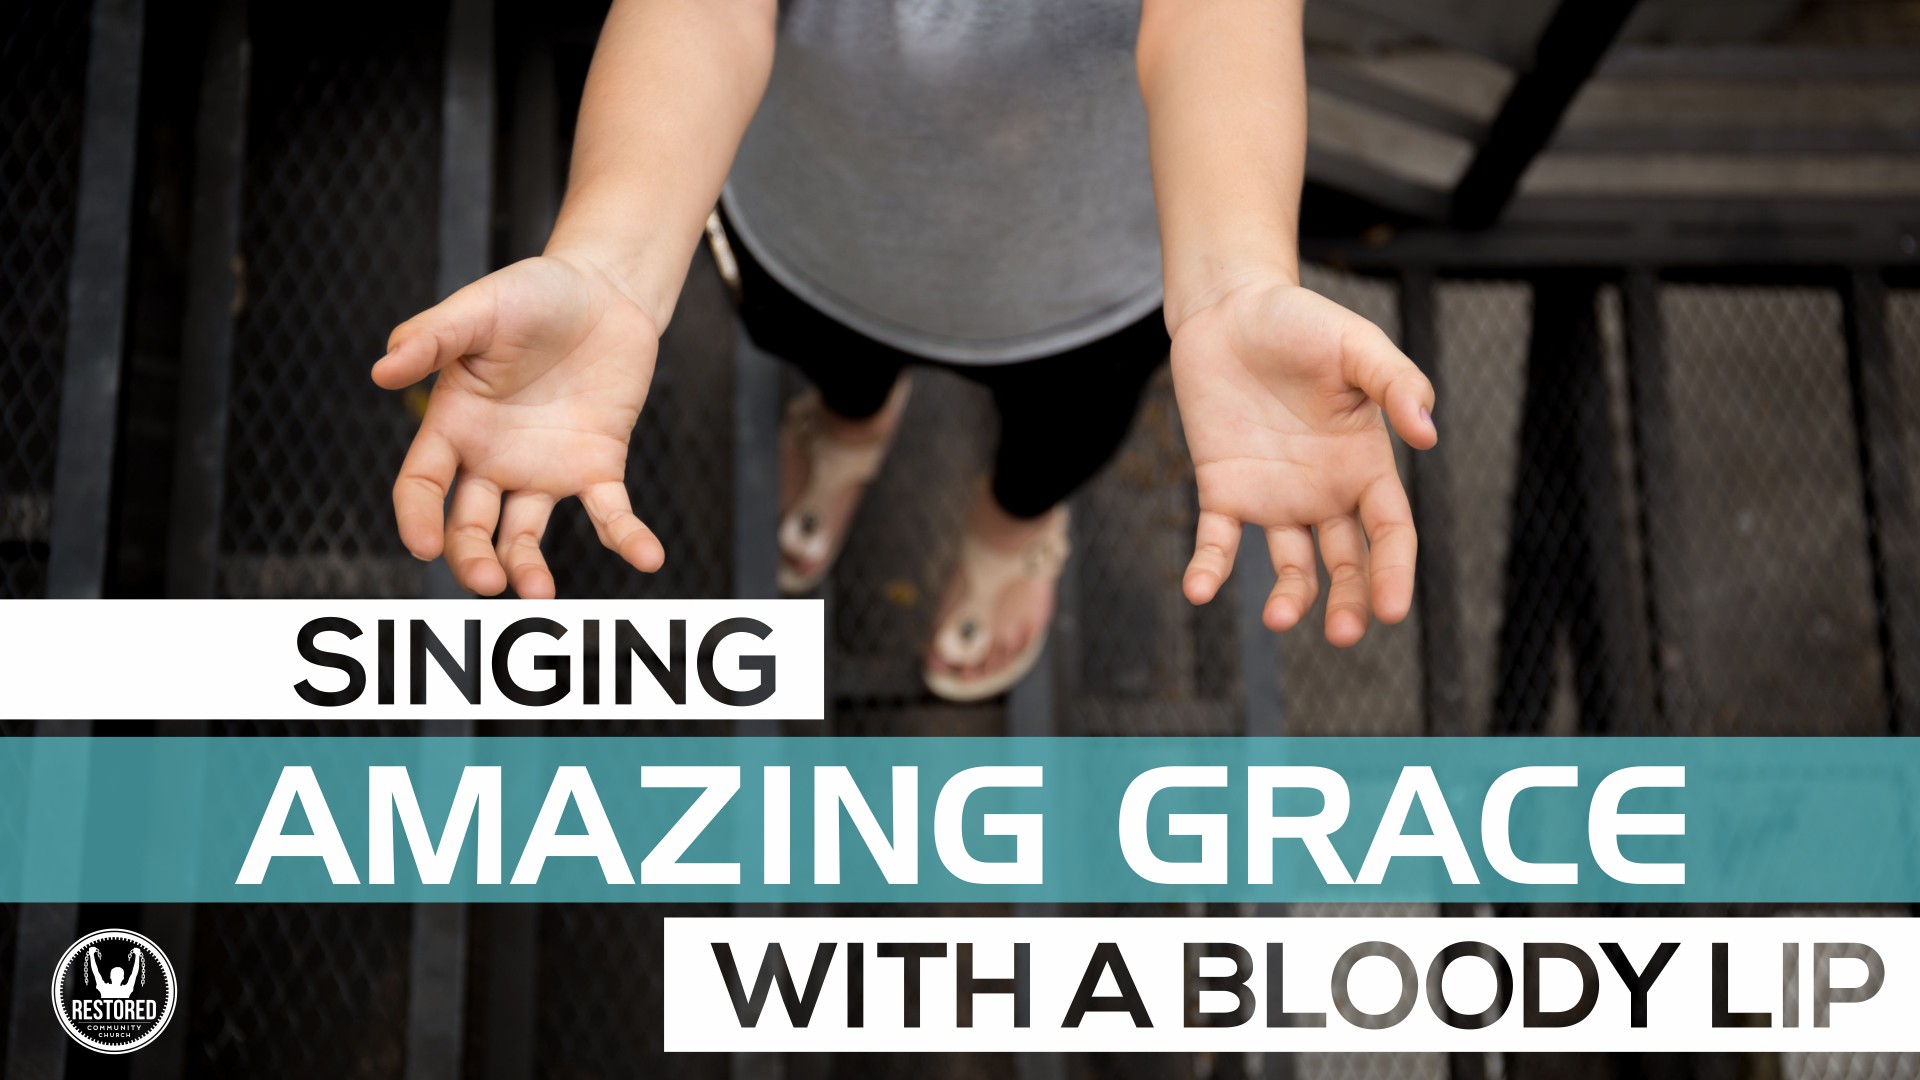 Singing Amazing Grace with a Bloody Lip